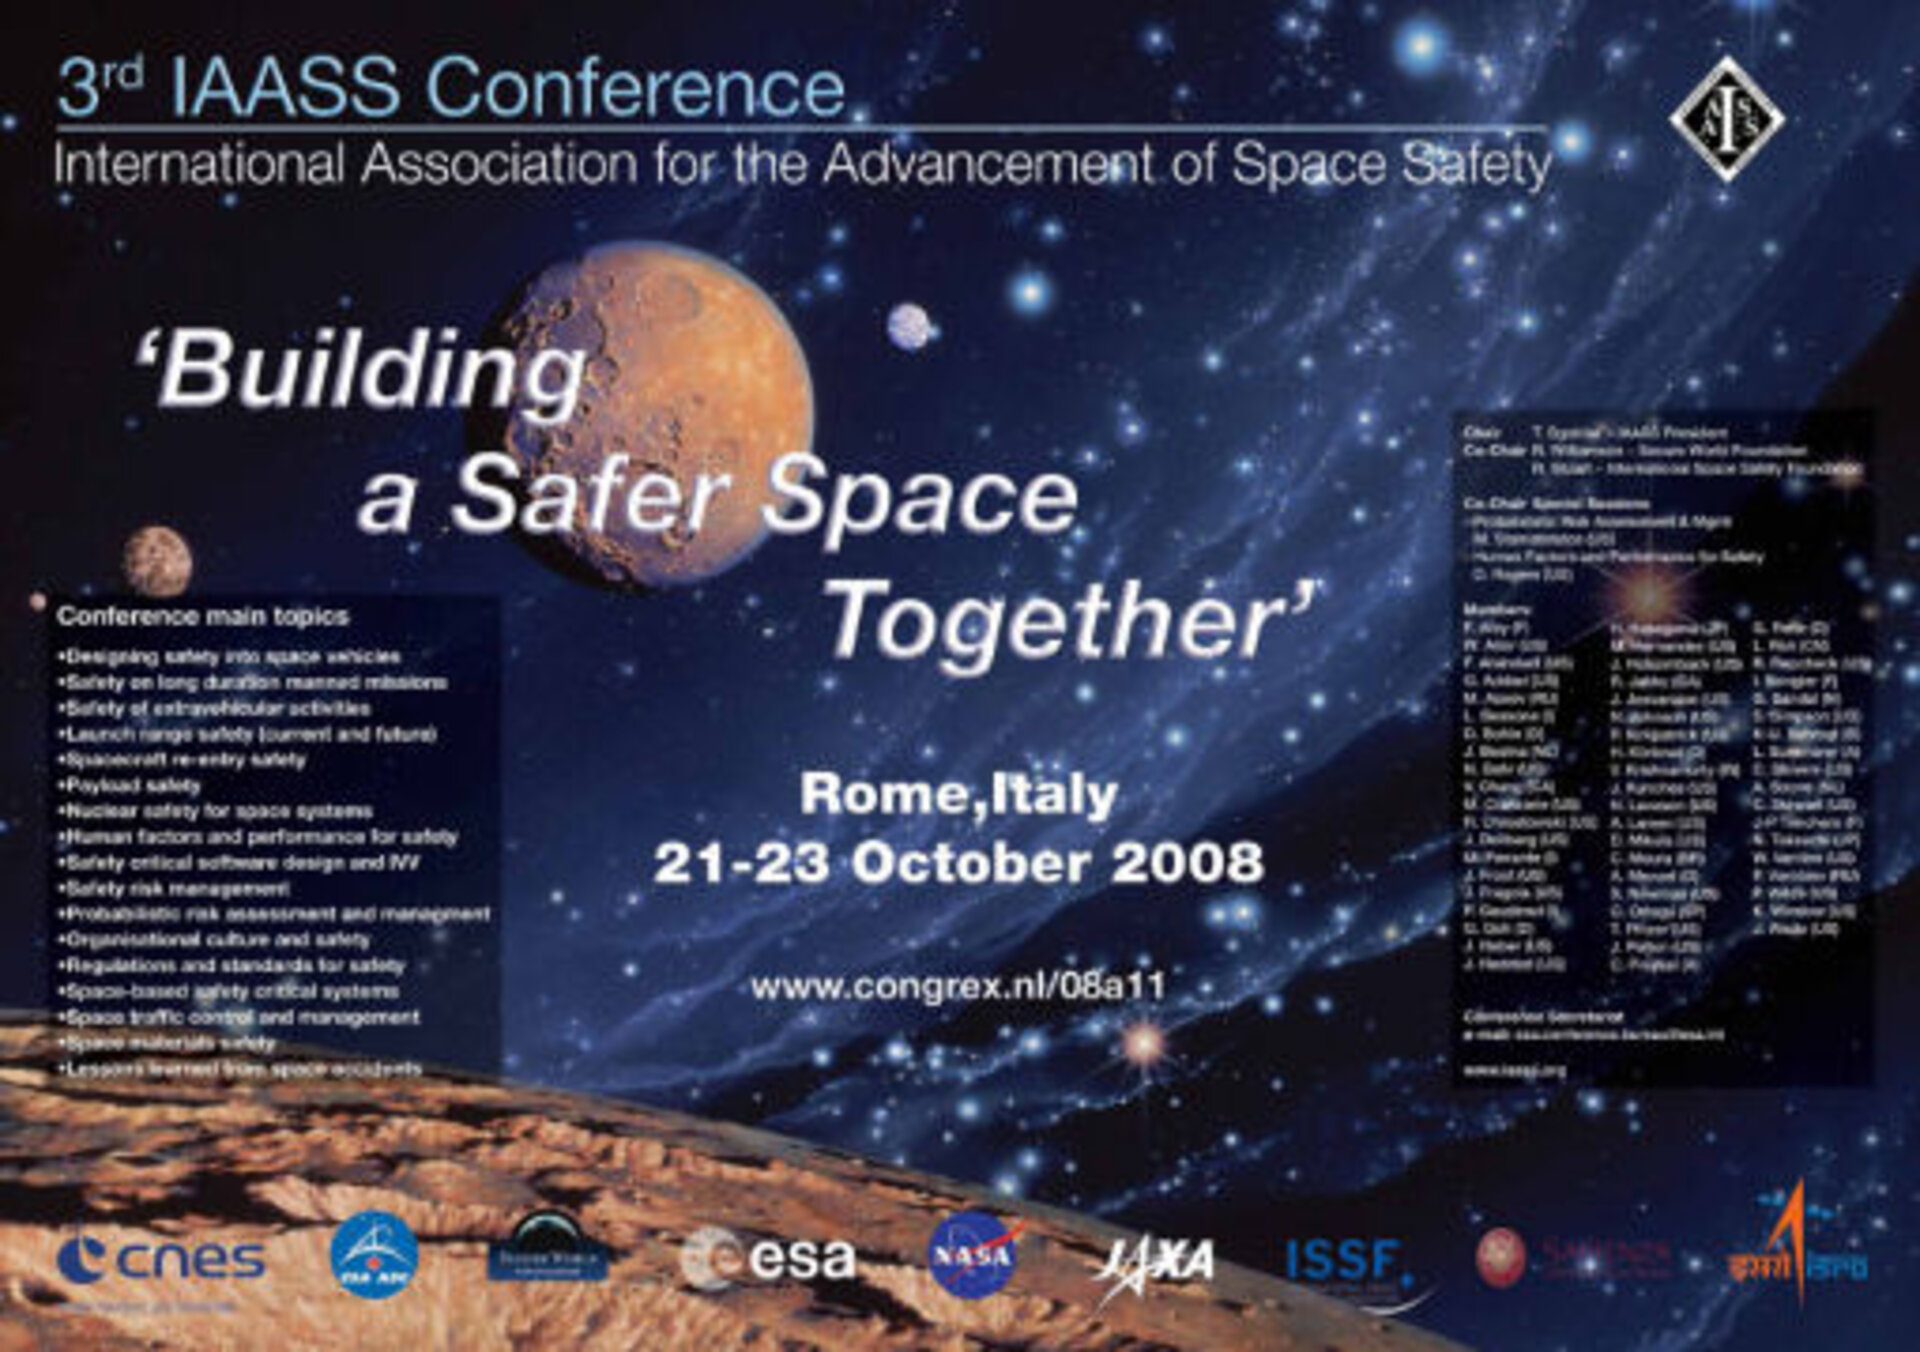 IAASS Conference poster 'Building a safer space together'